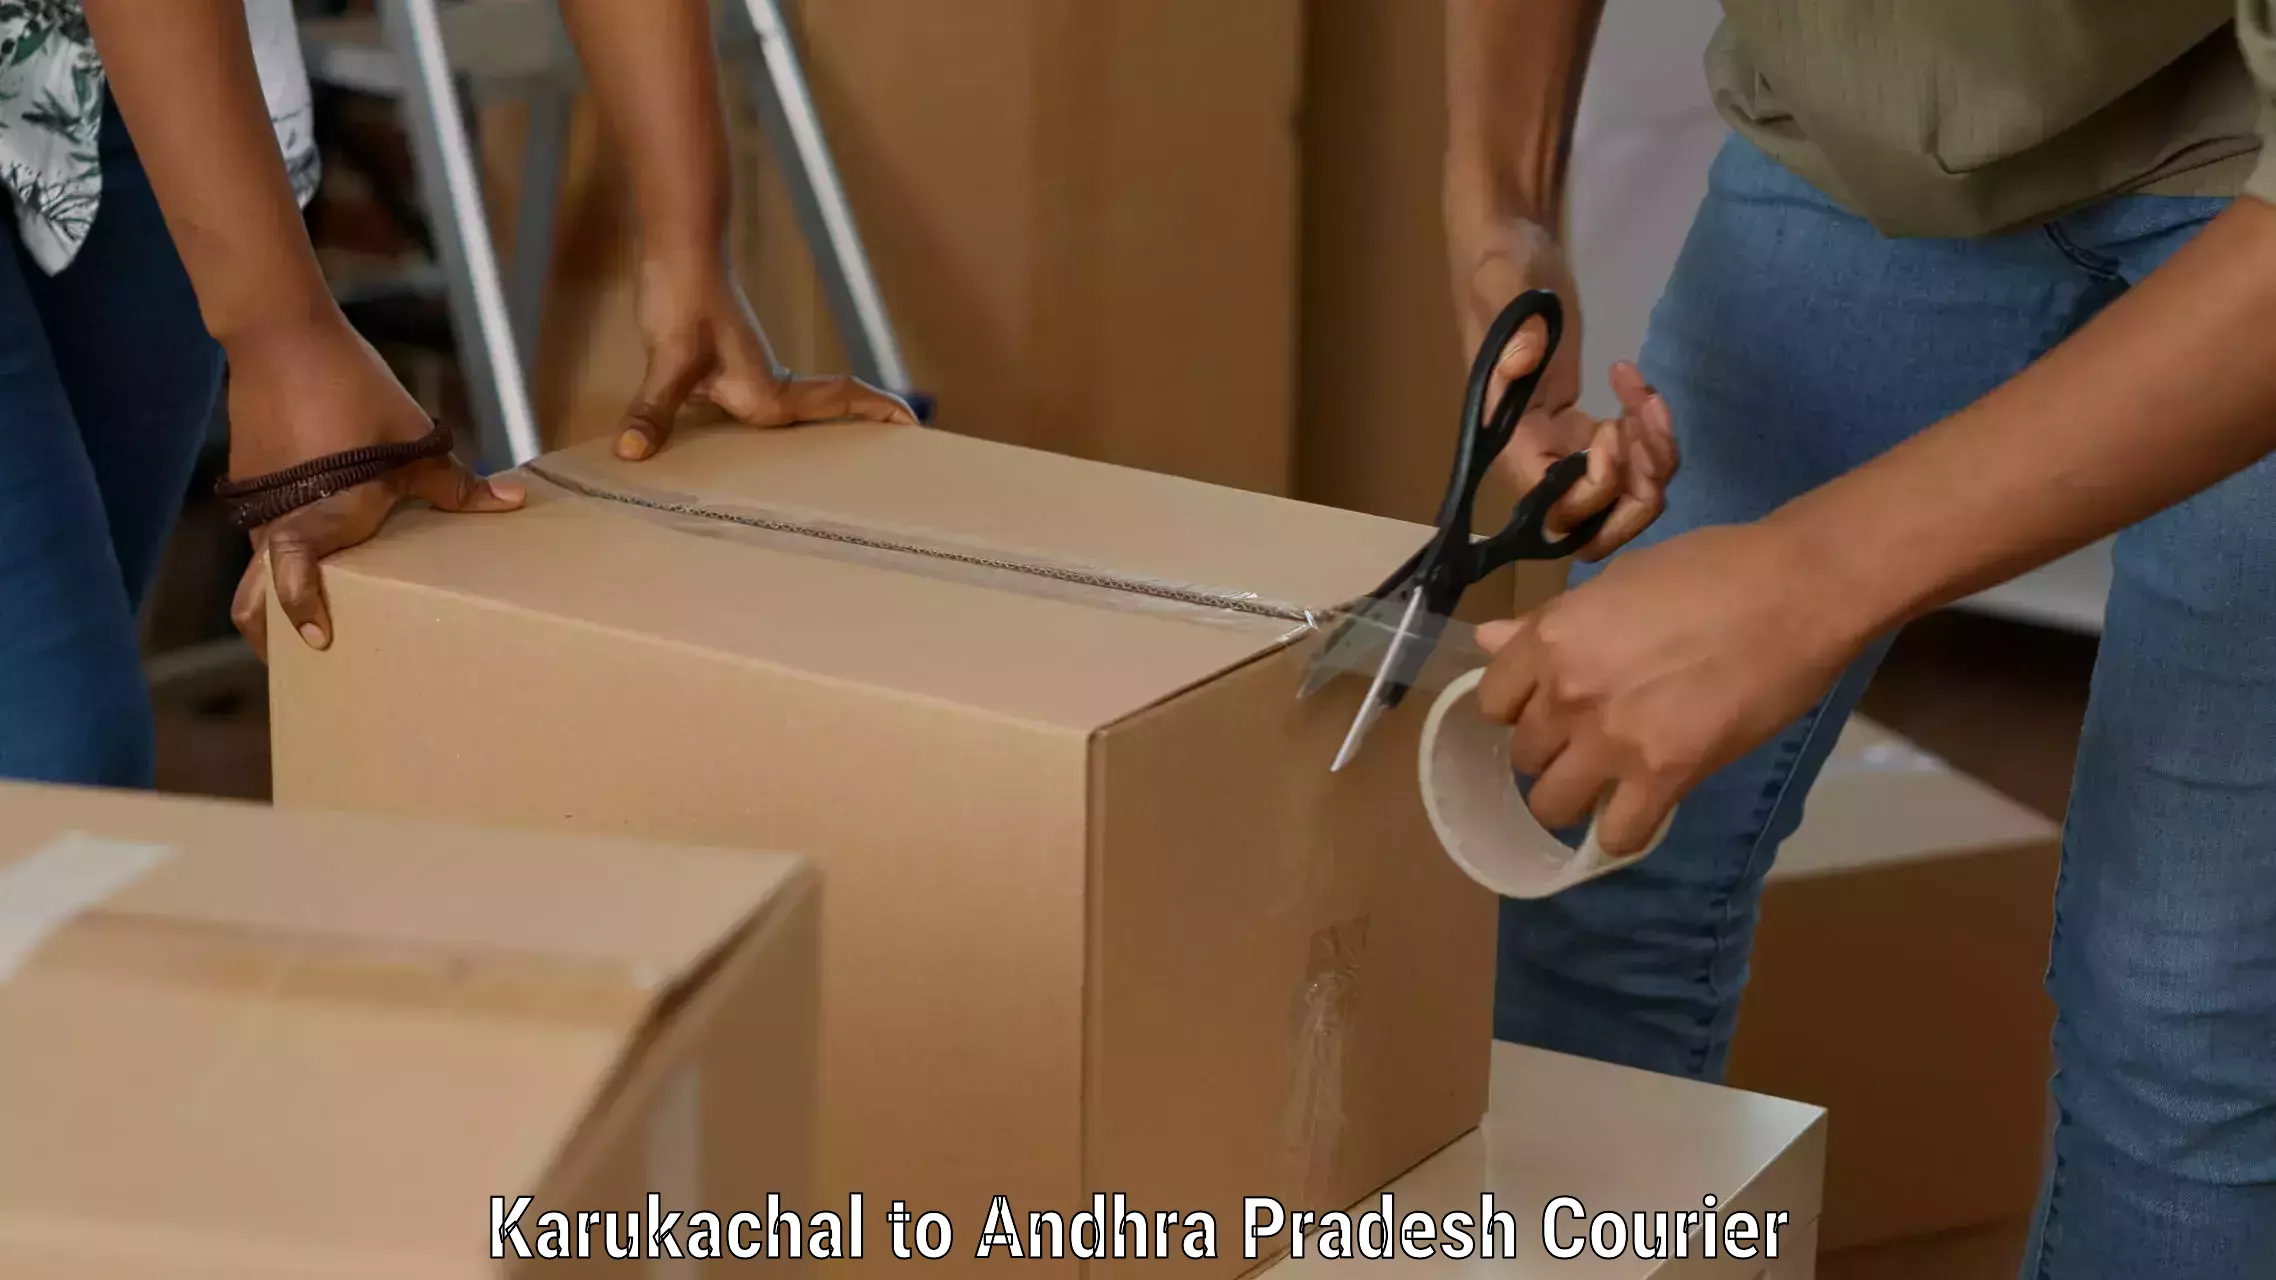 Expedited parcel delivery Karukachal to Yellamanchili